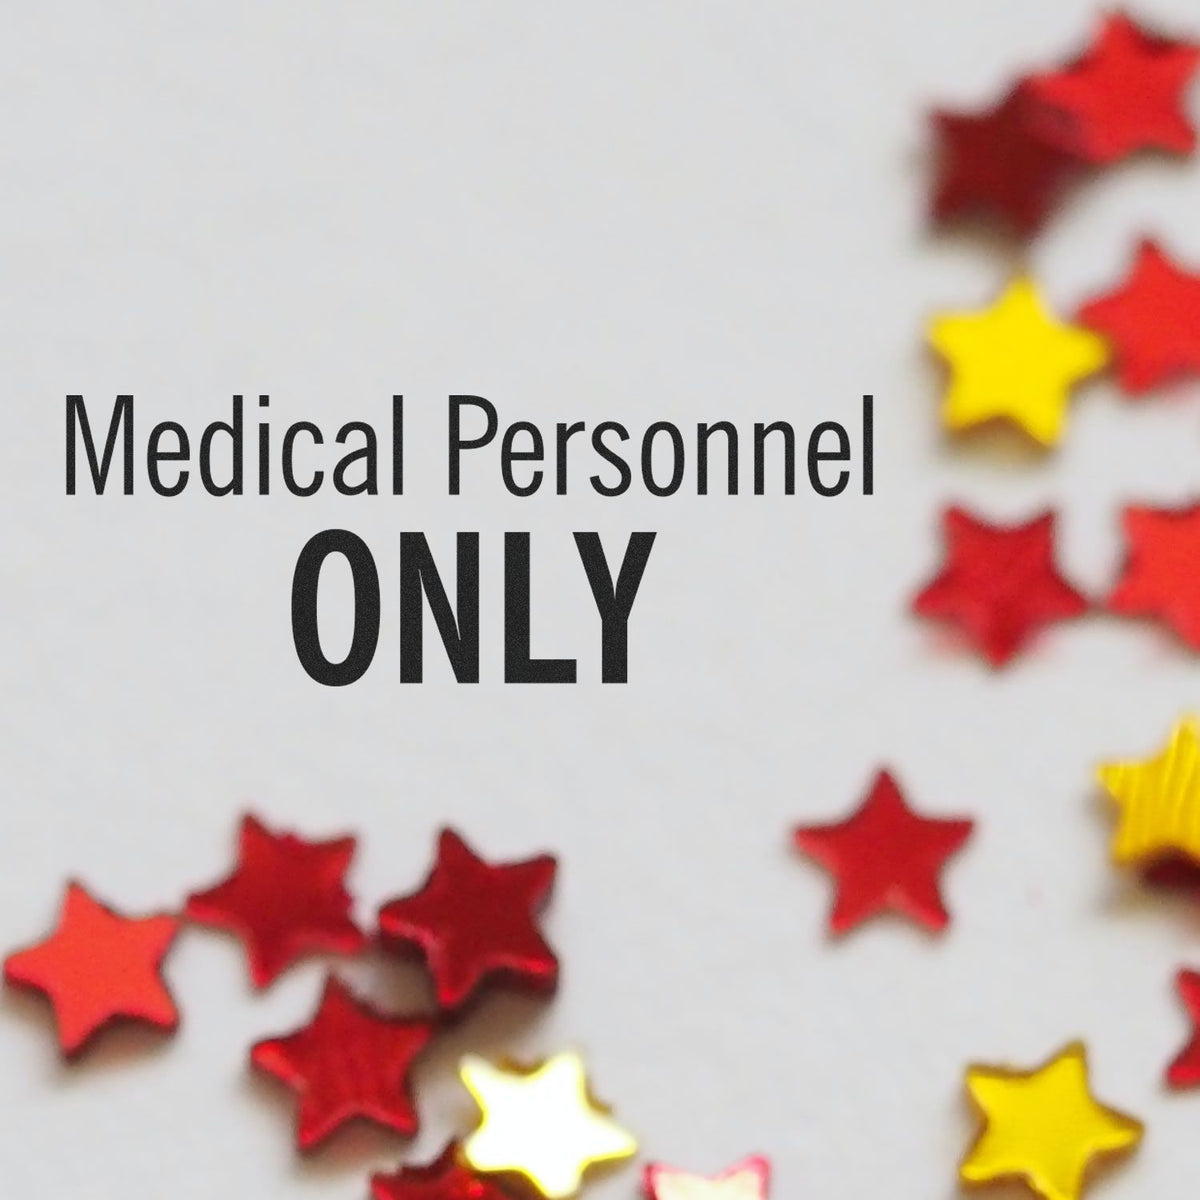 Medical Personnel Only Rubber Stamp Lifestyle Photo